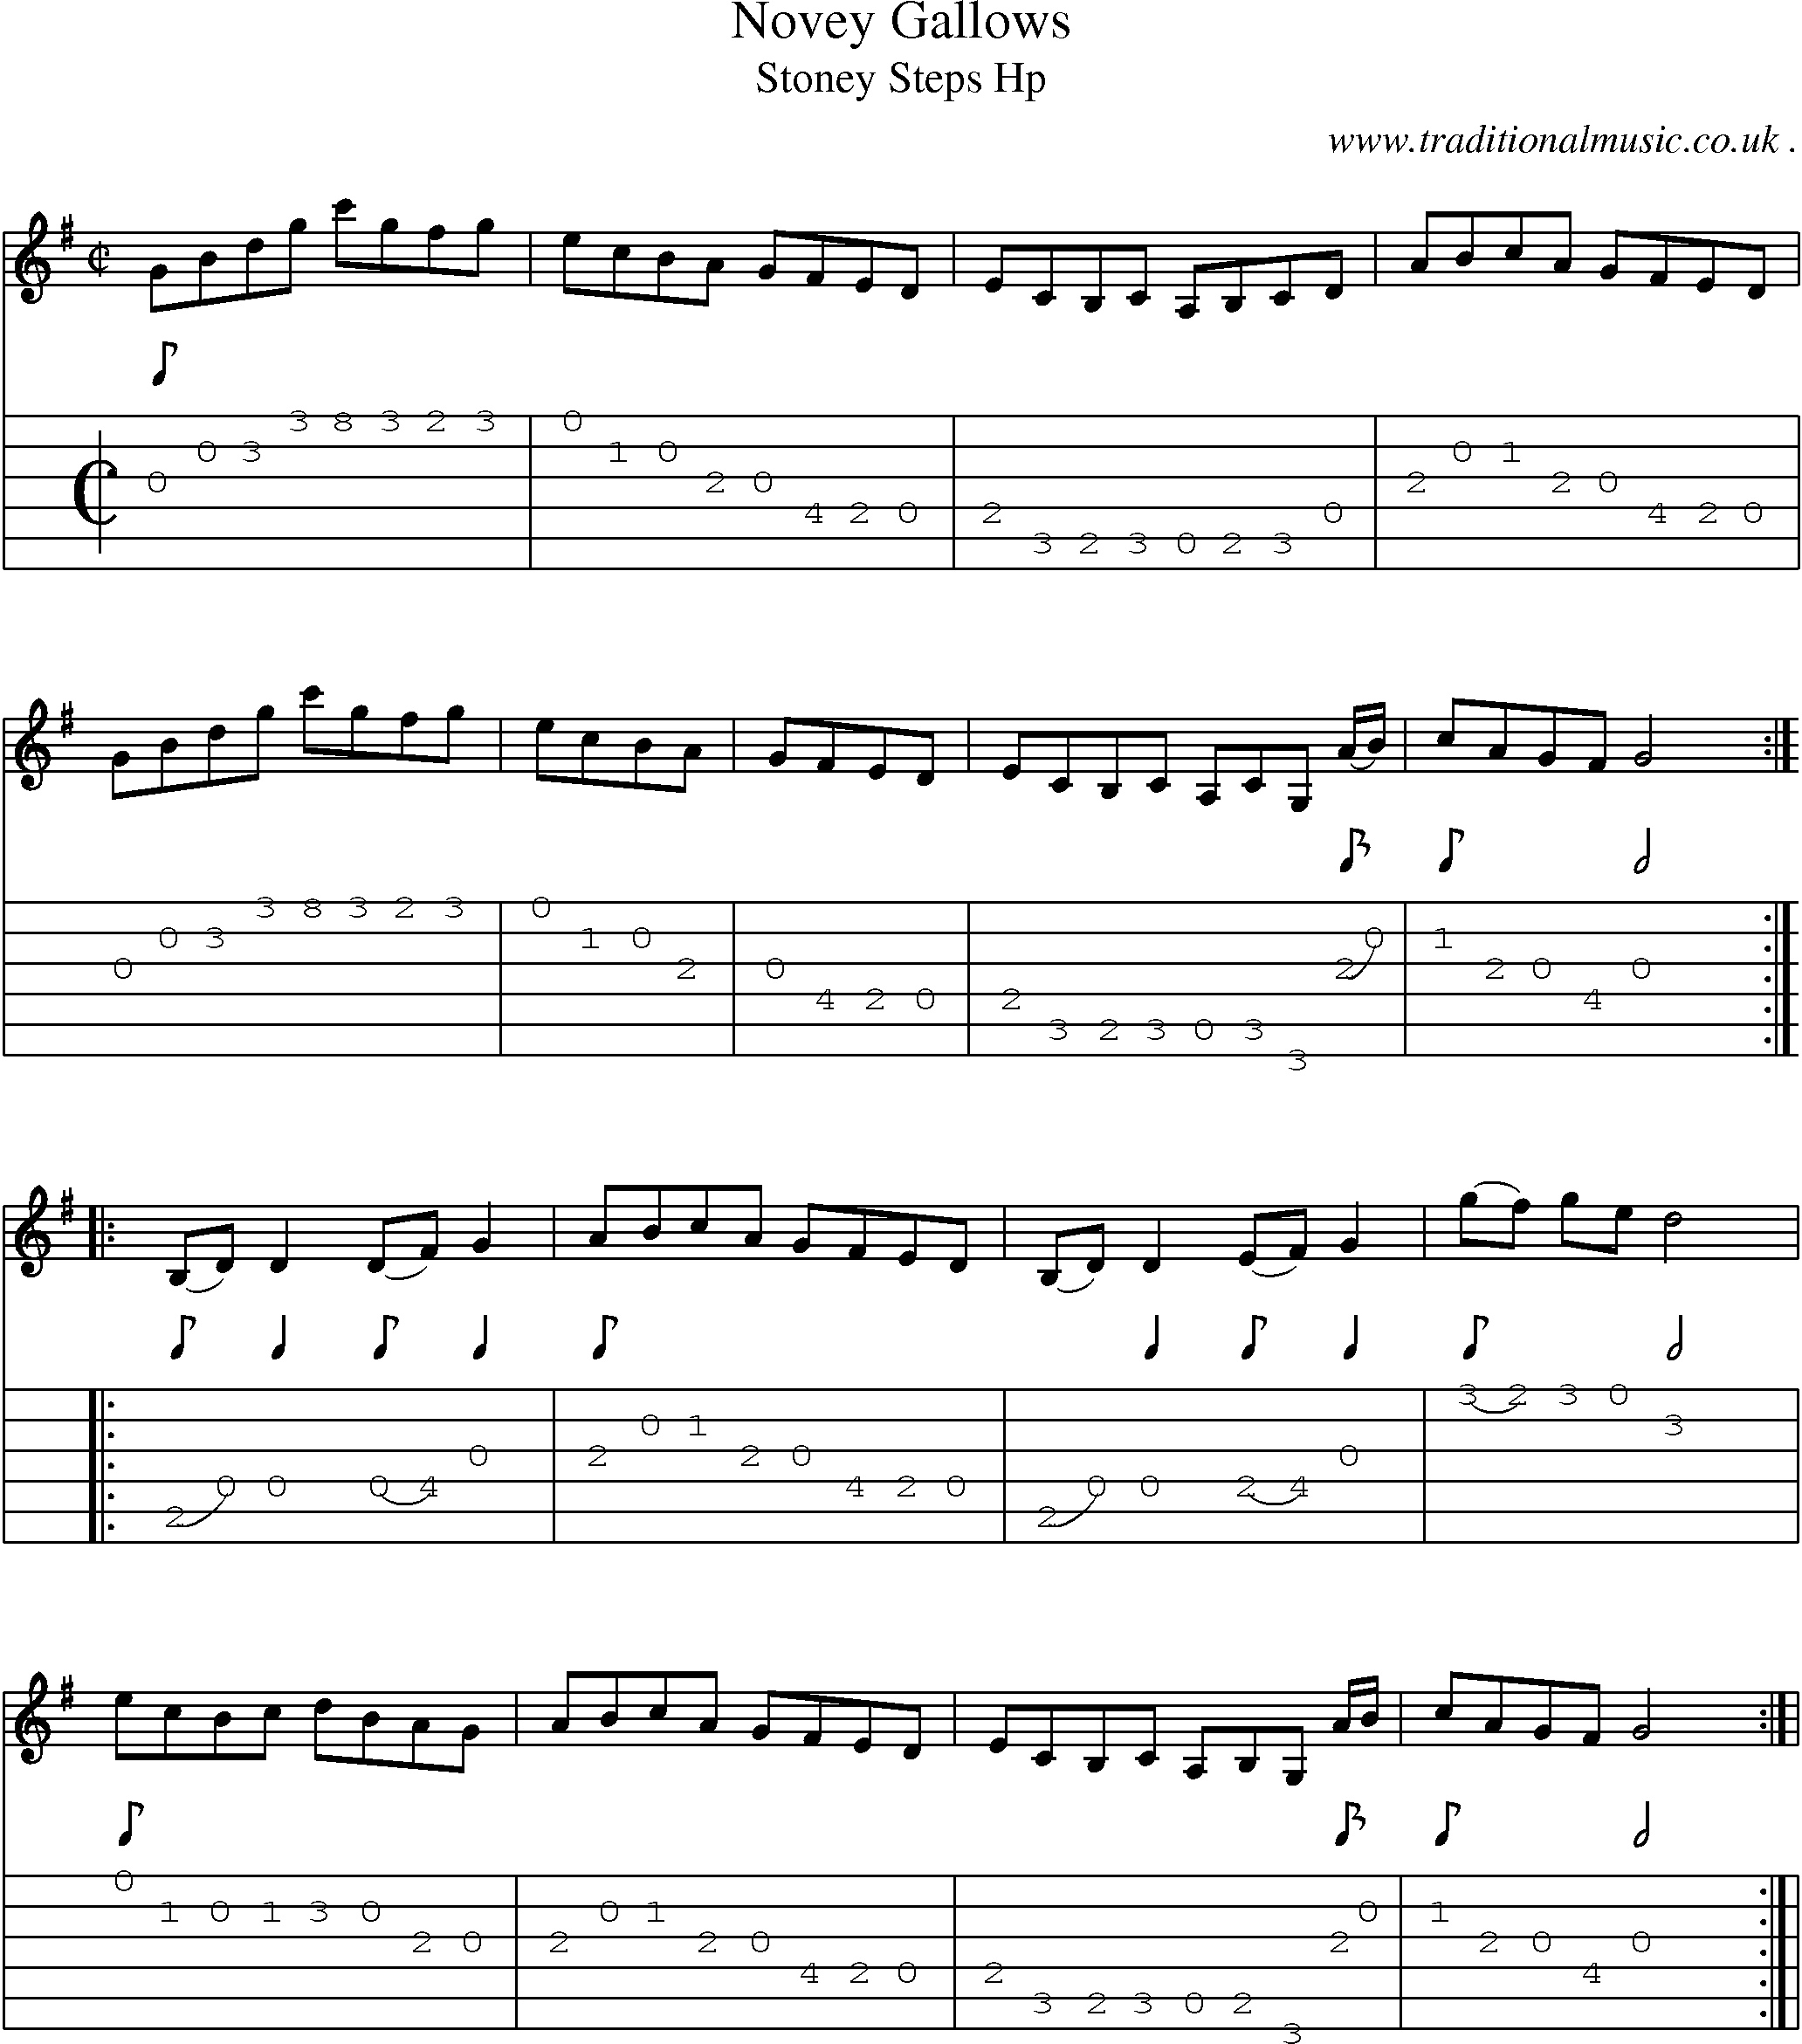 Sheet-Music and Guitar Tabs for Novey Gallows